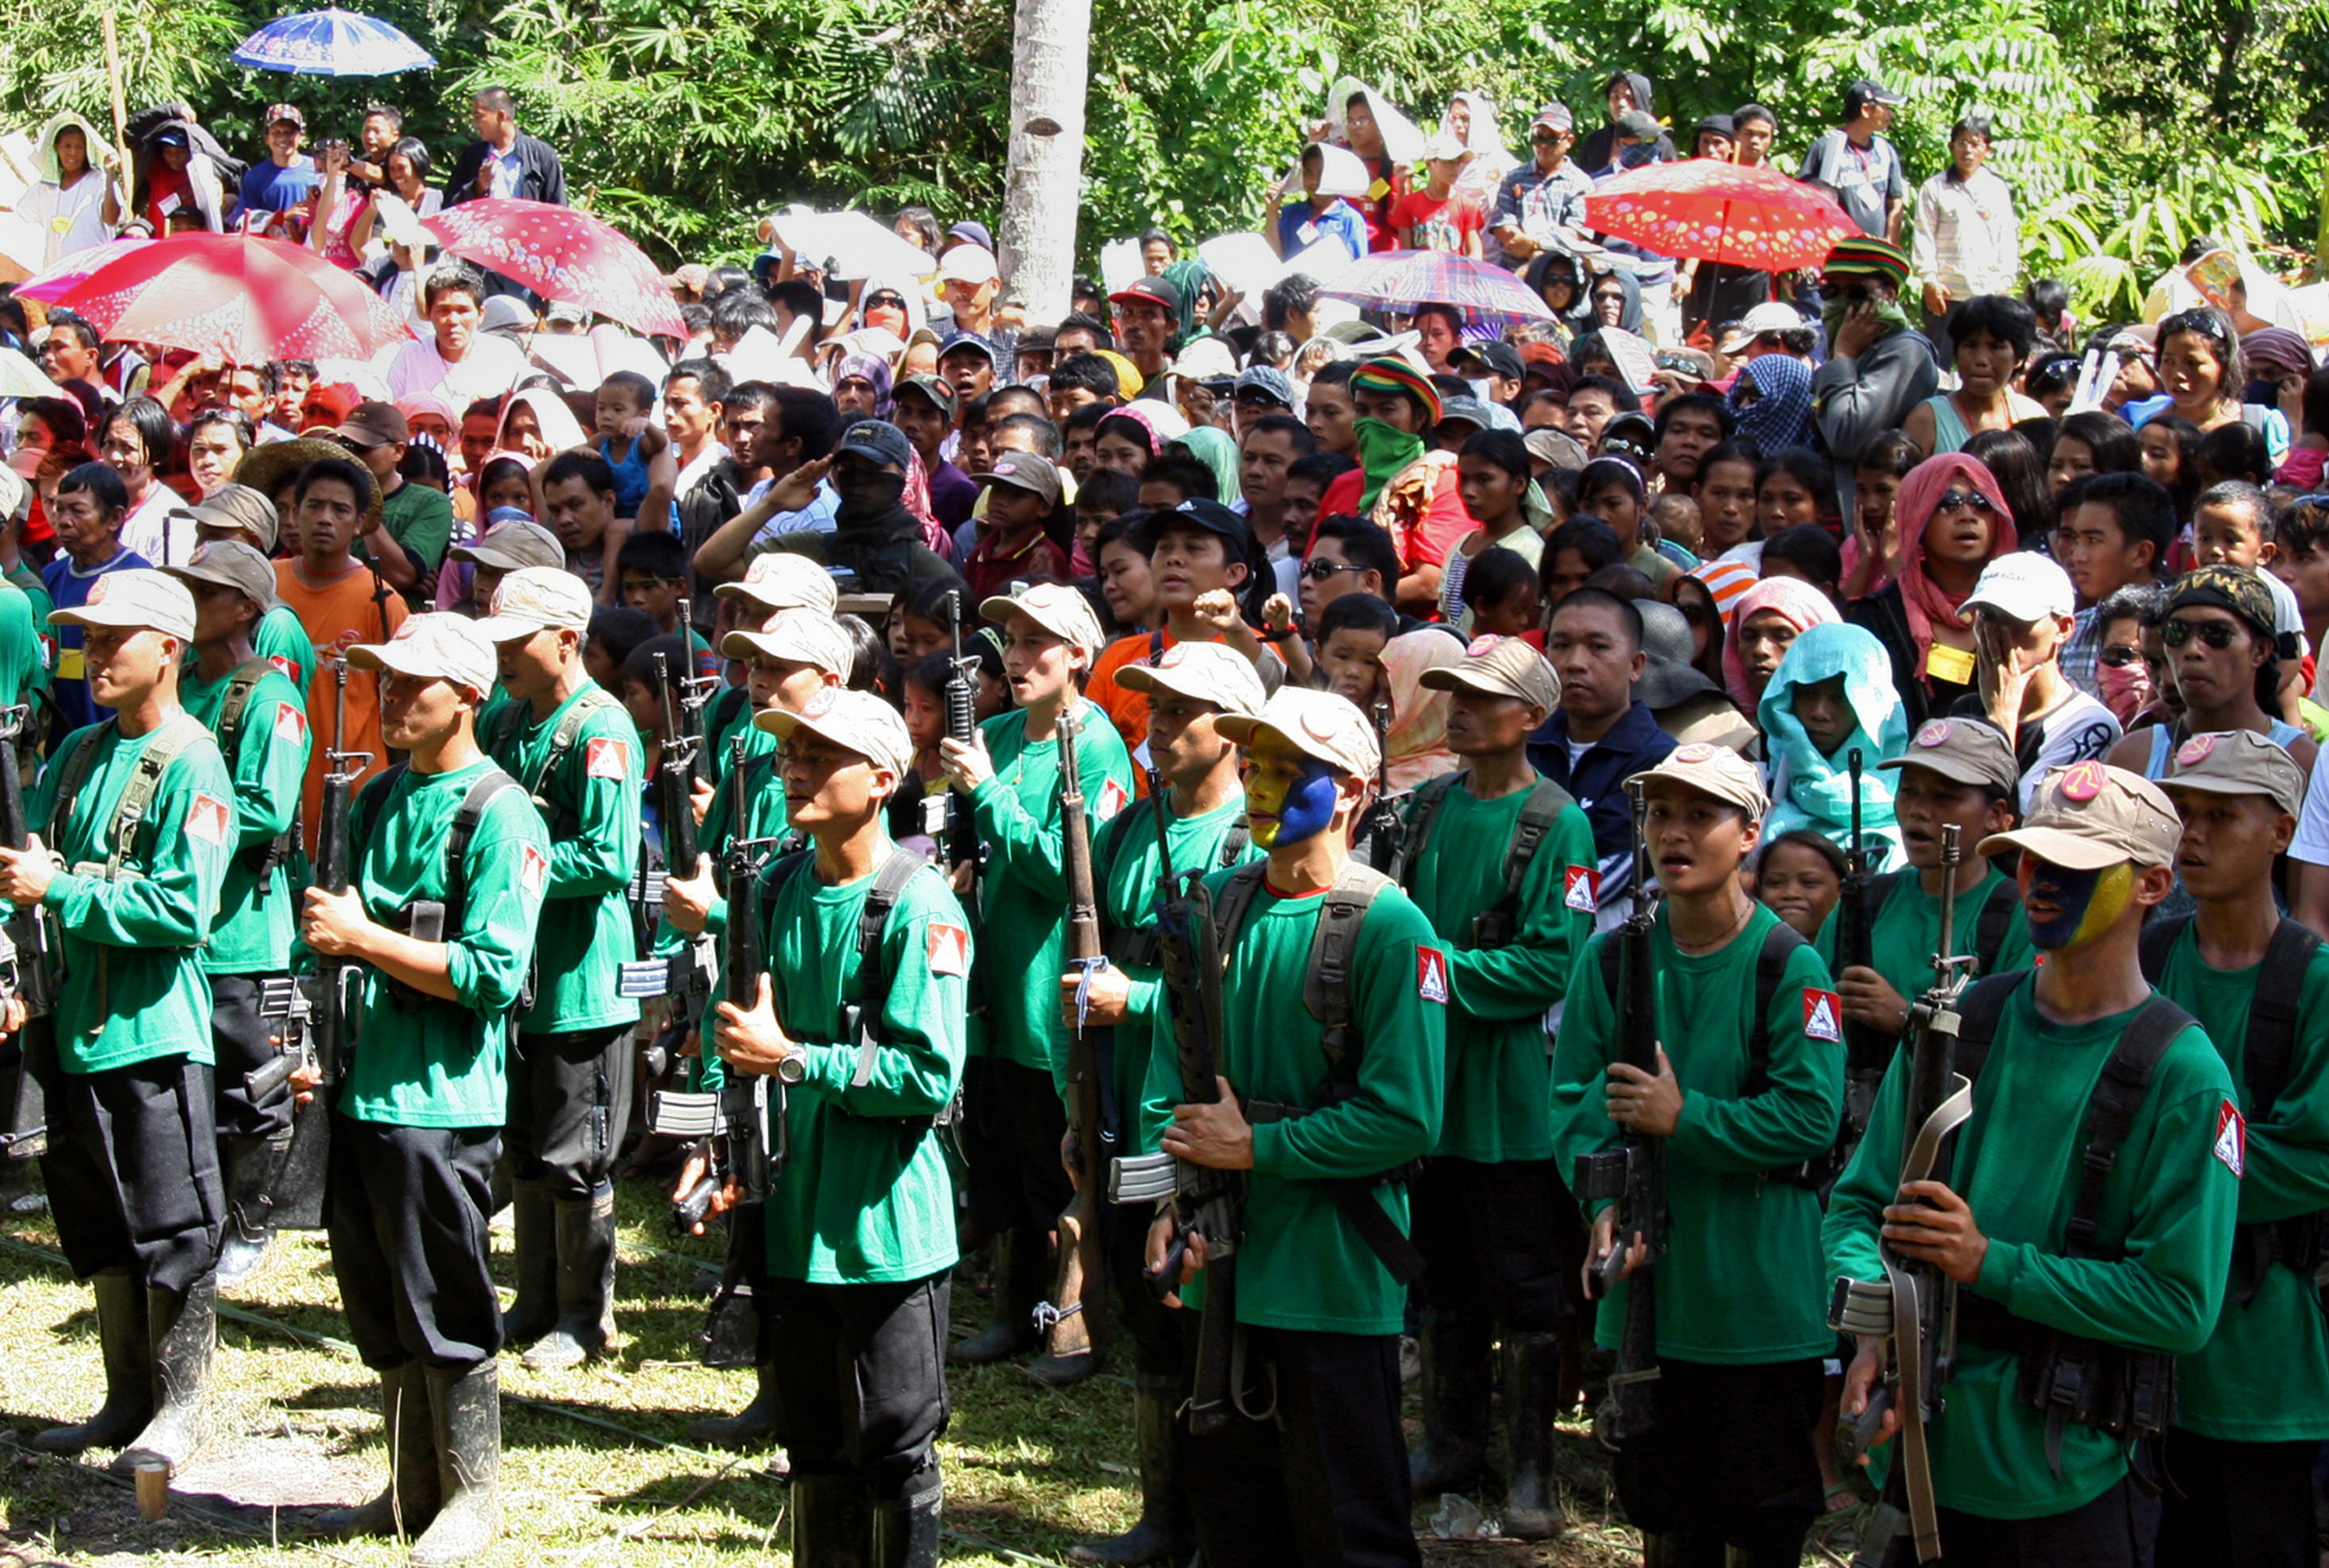 In this file photograph taken on December 26, 2010, New People's Army (NPA) guerrillas attend a ceremony to celebrate the 42nd founding anniversary of the Communist Party of the Philippines, at a remote village in the southern island of Mindanao. The Philippine government and communist guerrillas have agreed to ceasefires from August 20, both sides said, ahead of crucial peace talks next week to end one of Asia's longest insurgencies. / AFP PHOTO / STRINGER / XGTY